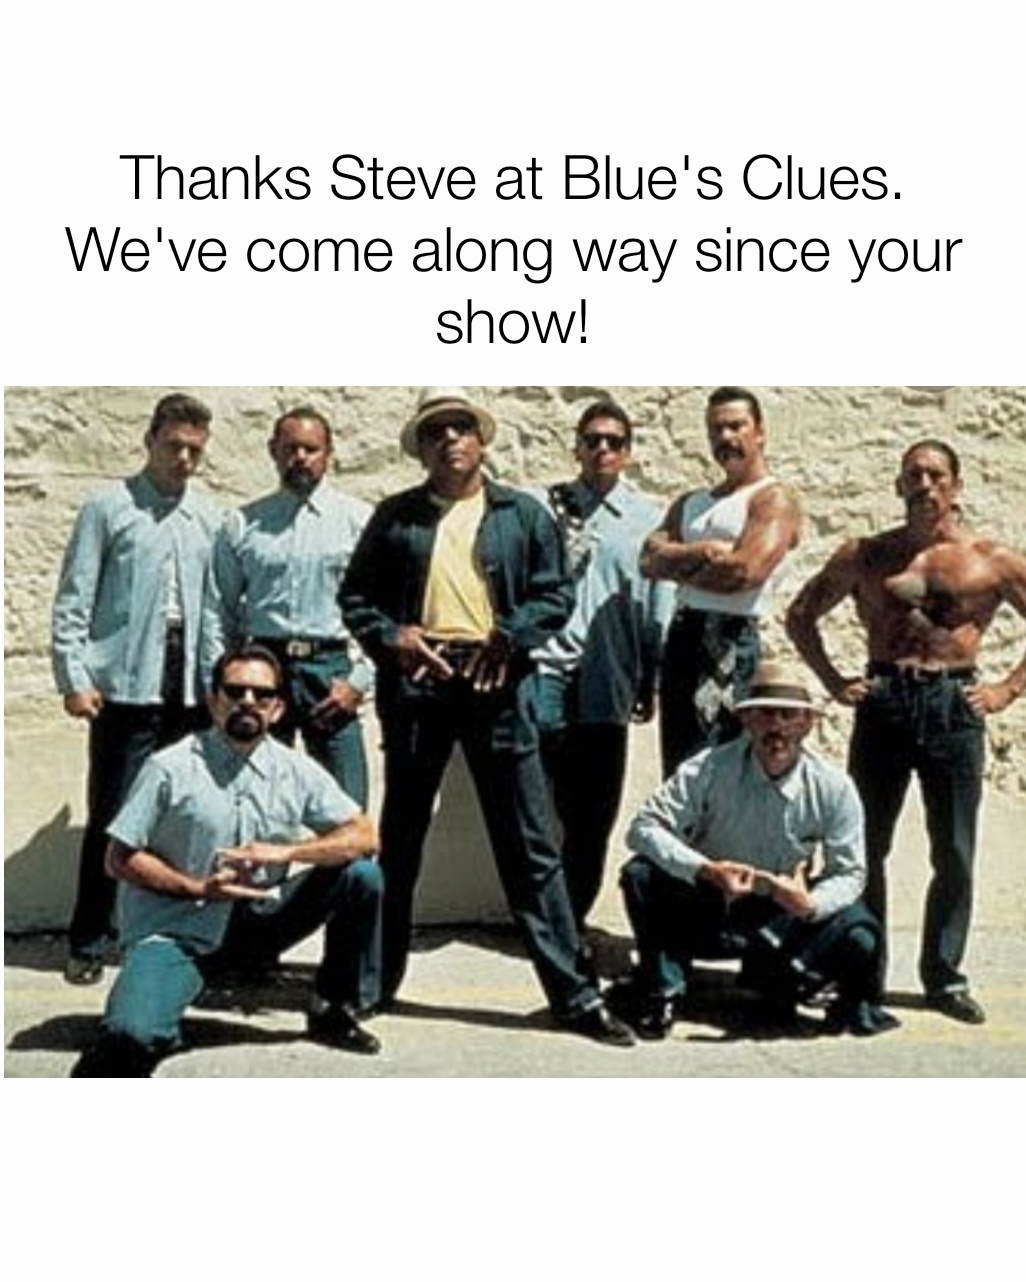 Thanks Steve at Blue's Clues. We've come along way since your show!